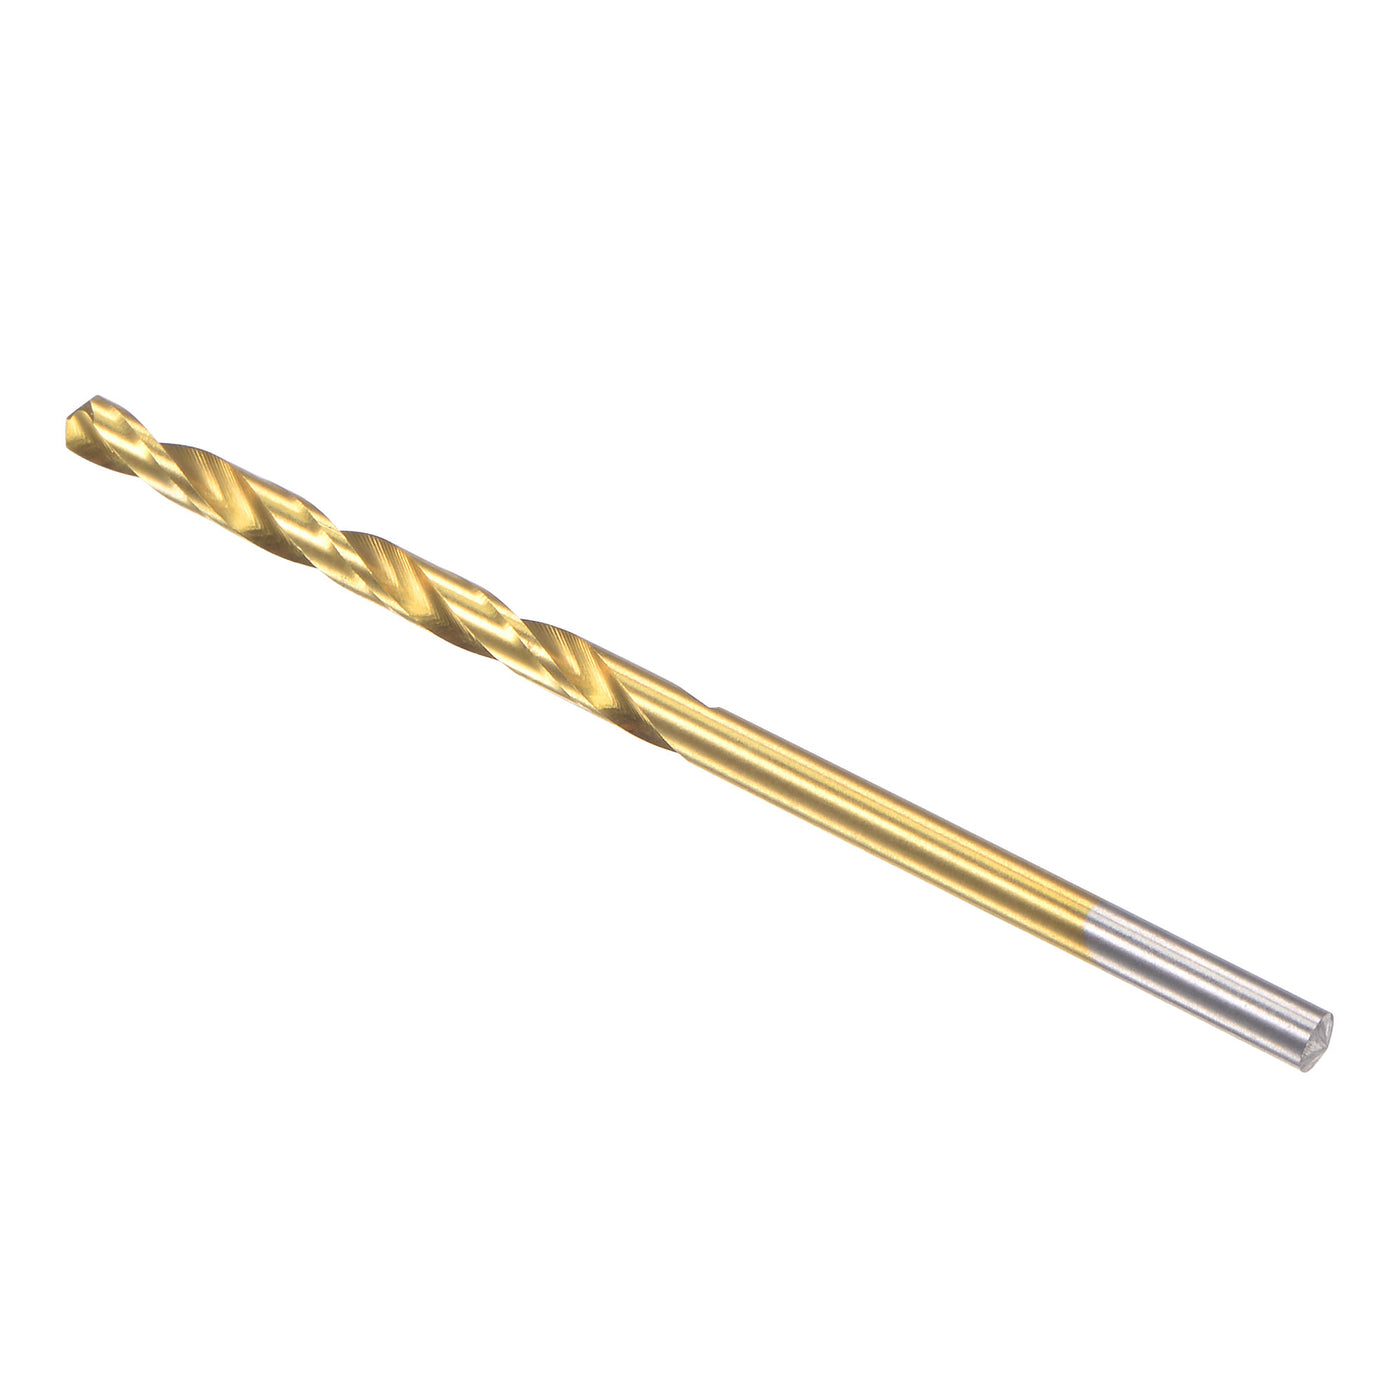 uxcell Uxcell High Speed Steel Twist Drill Bit 2.5mm Fully Ground Titanium Coated 12 Pcs